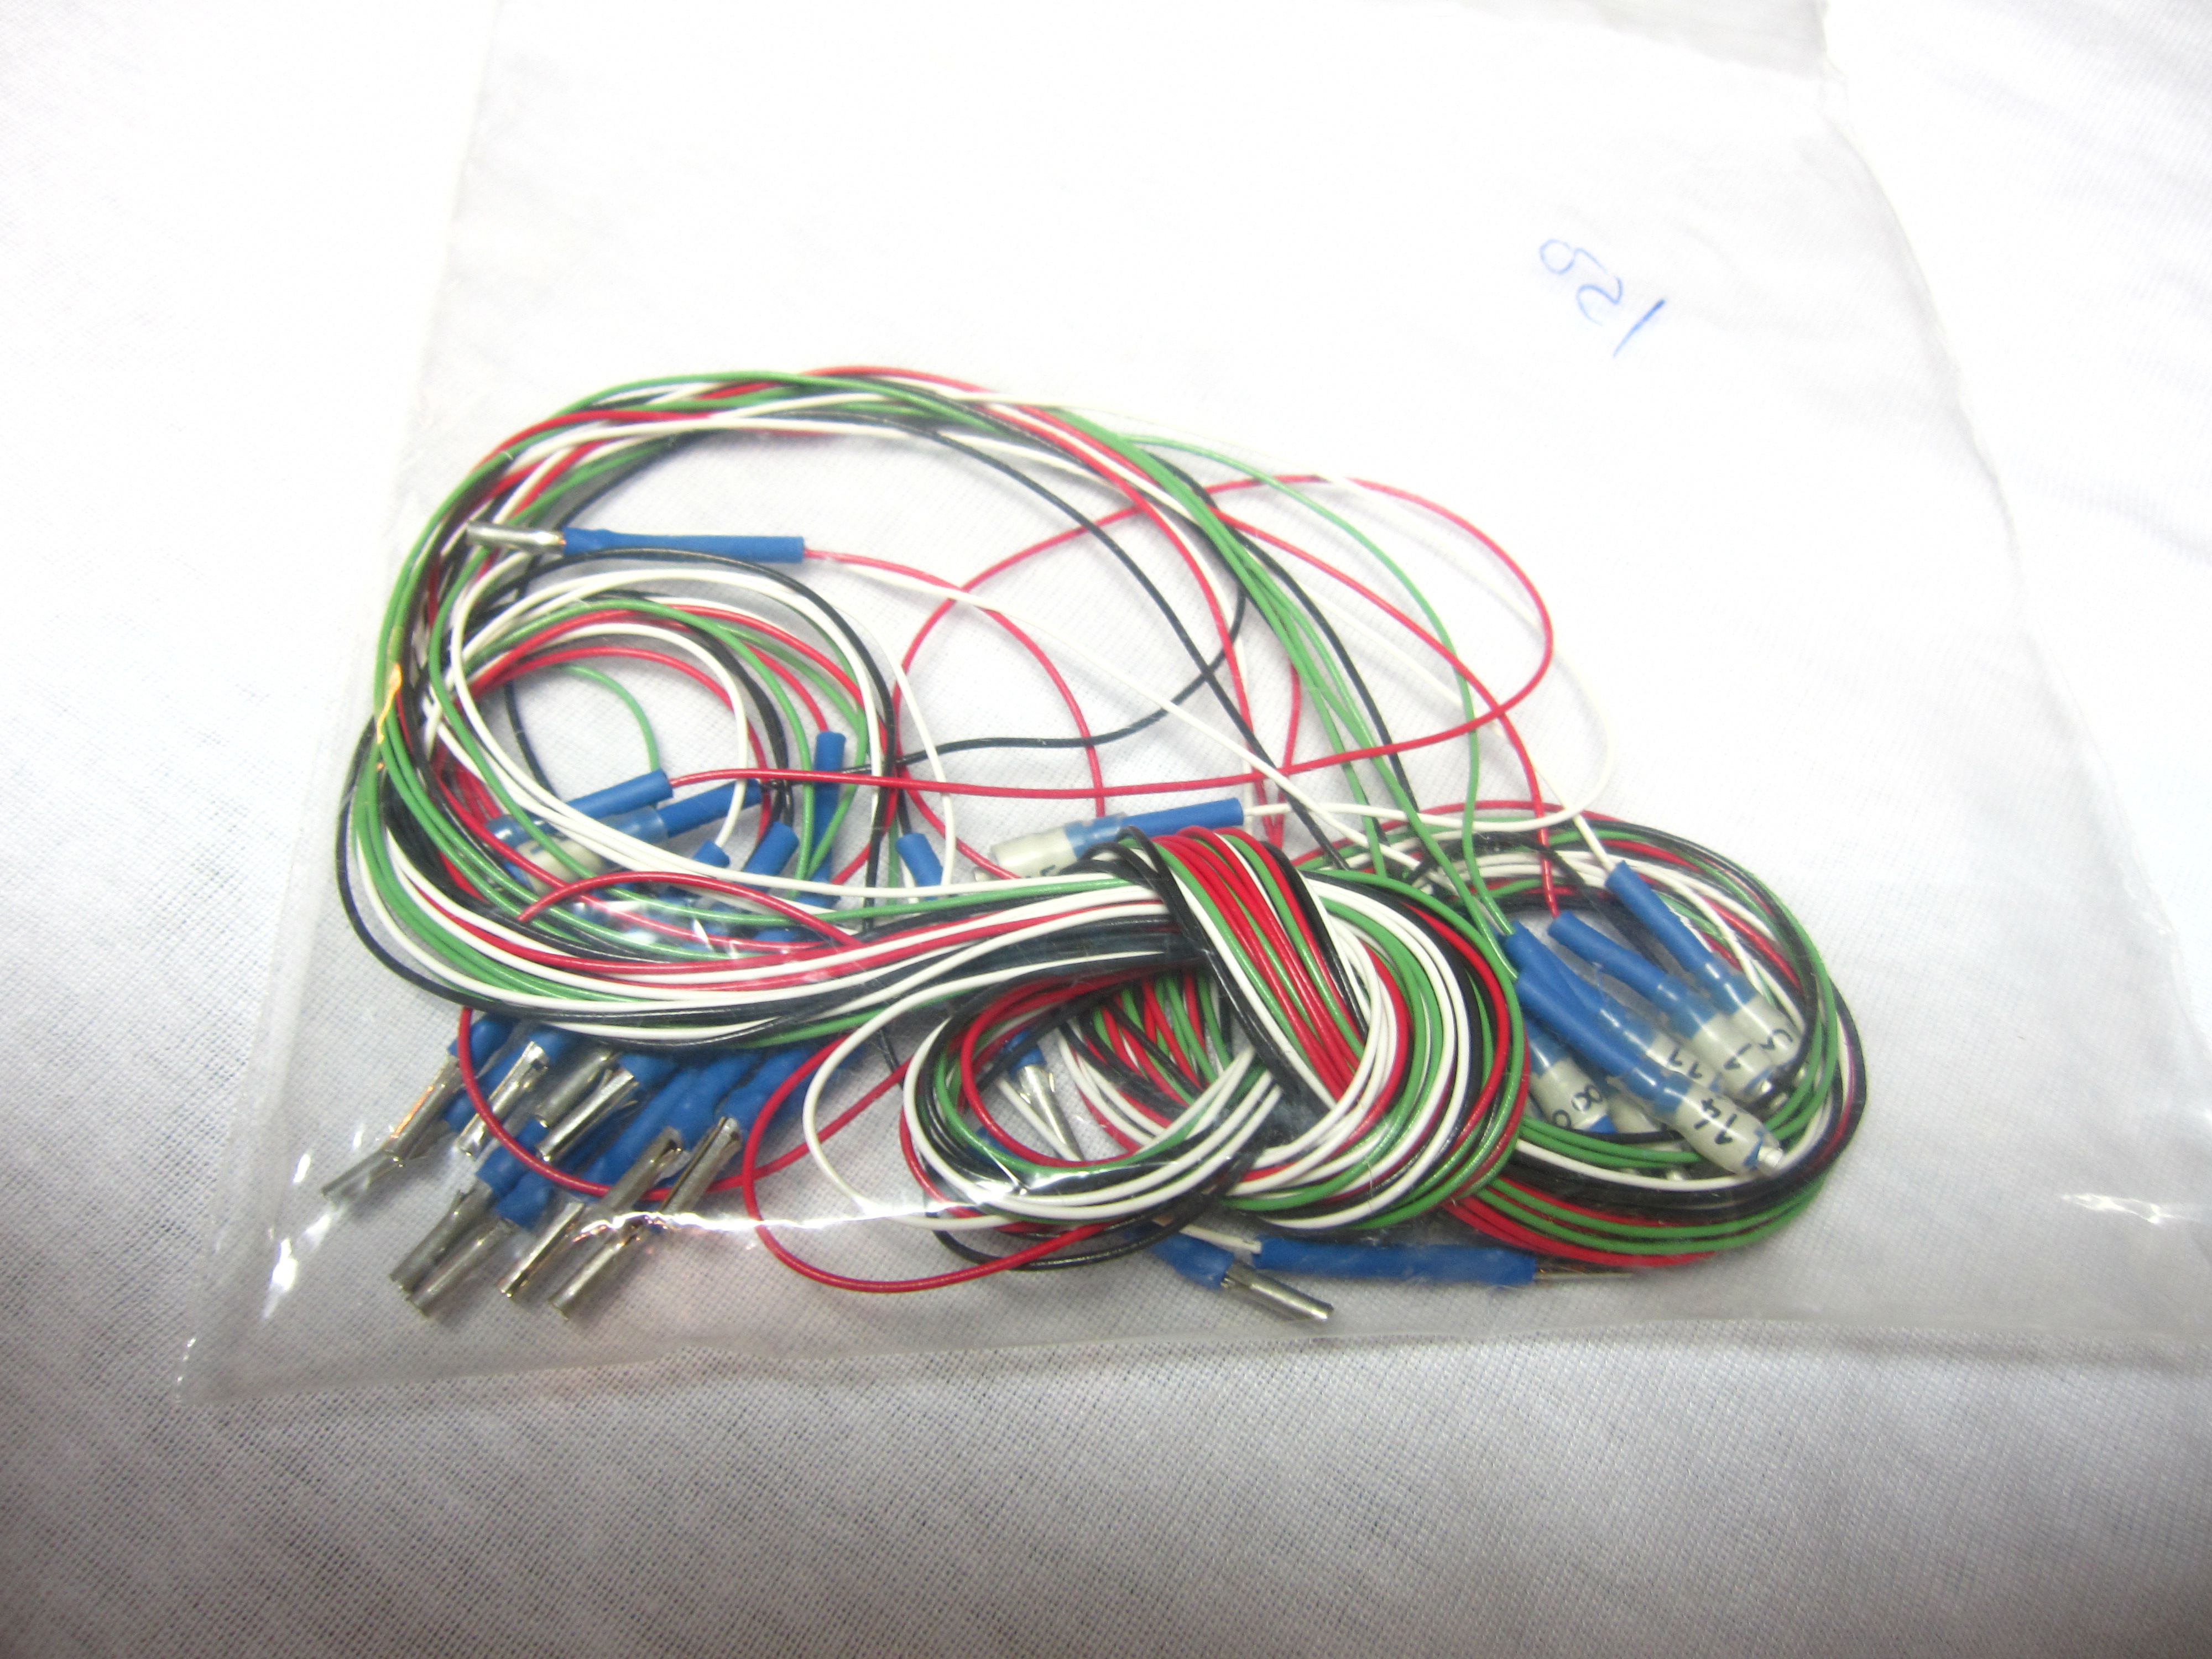 Gentronics Multineedle Wires - Click Image to Close